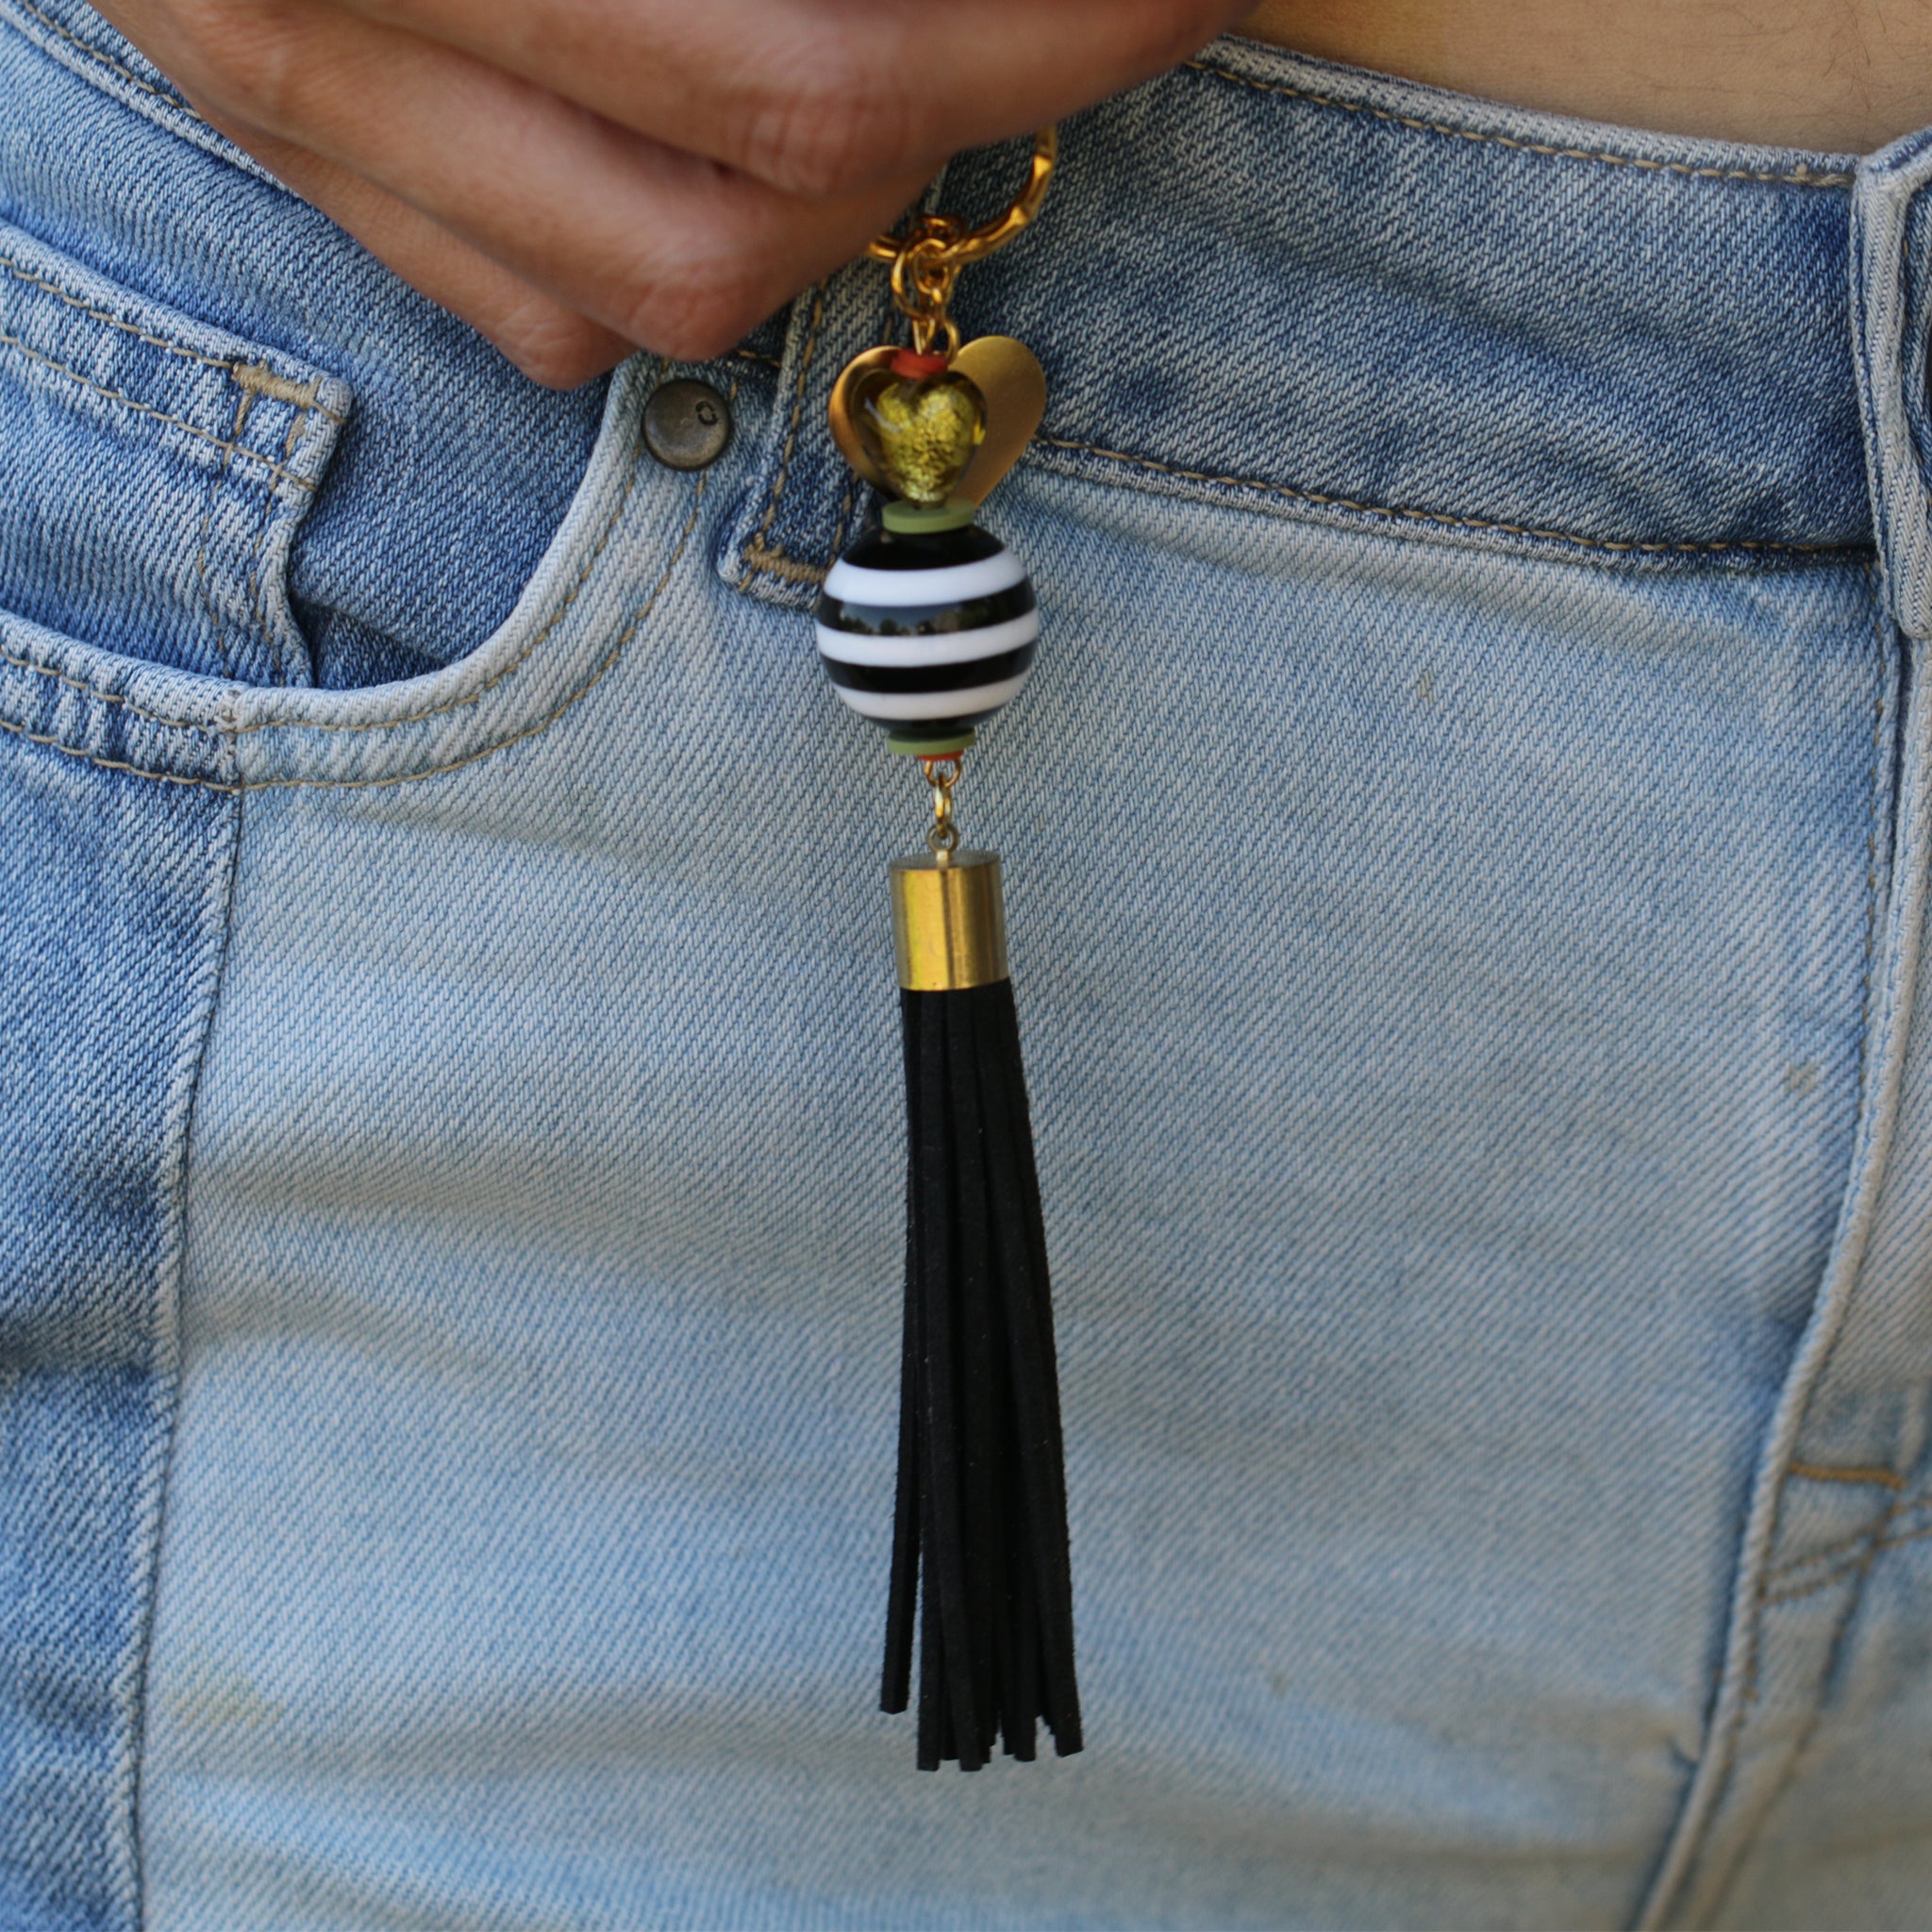 A Modern, Colorful Hand Made Keychain As A Gift For Friend Or Family.